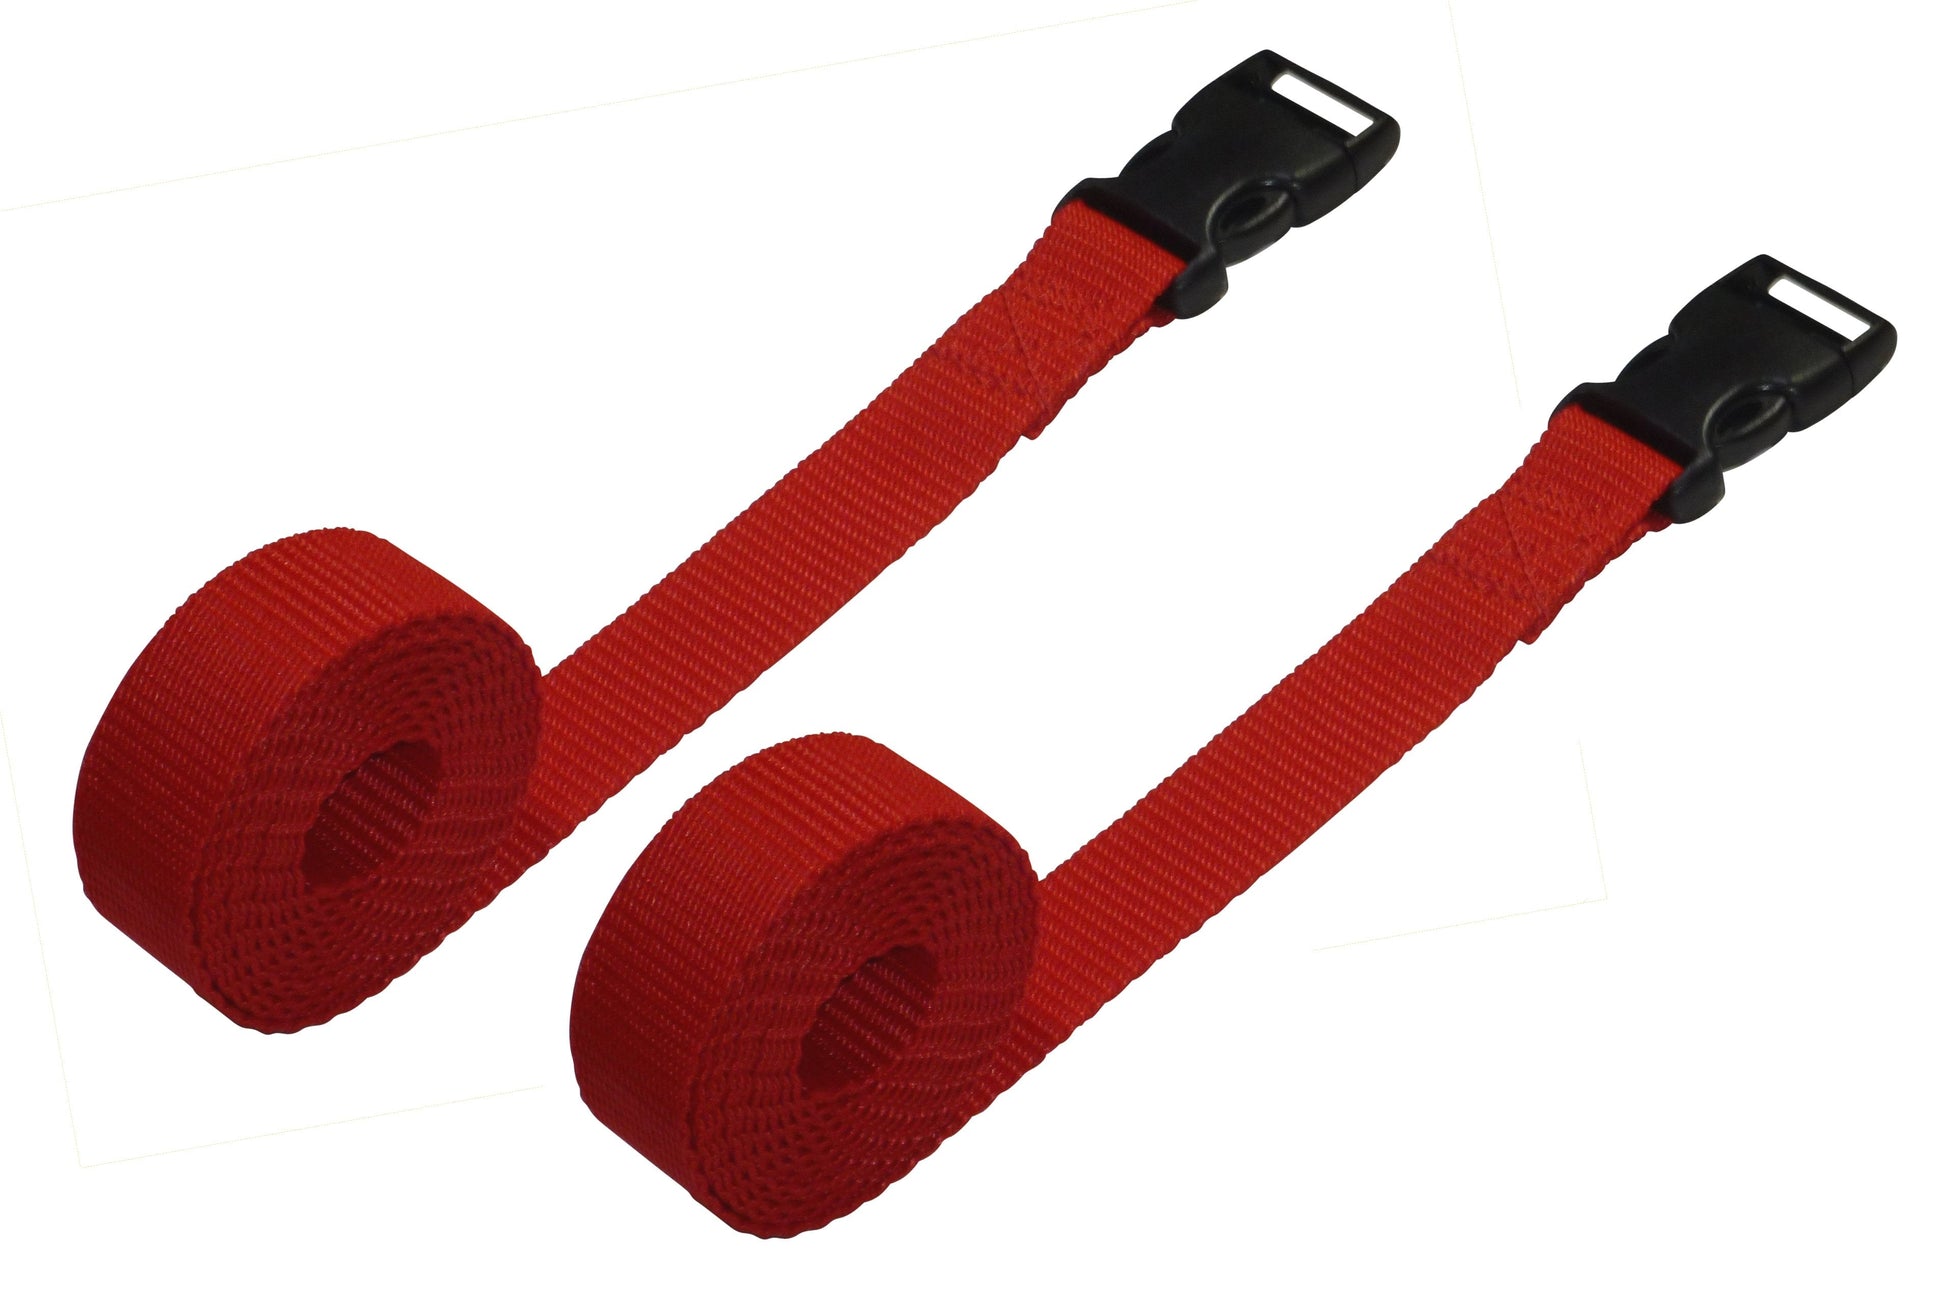 Benristraps 2 Pack Webbing Straps with Clips - Adjustable Luggage Straps in red